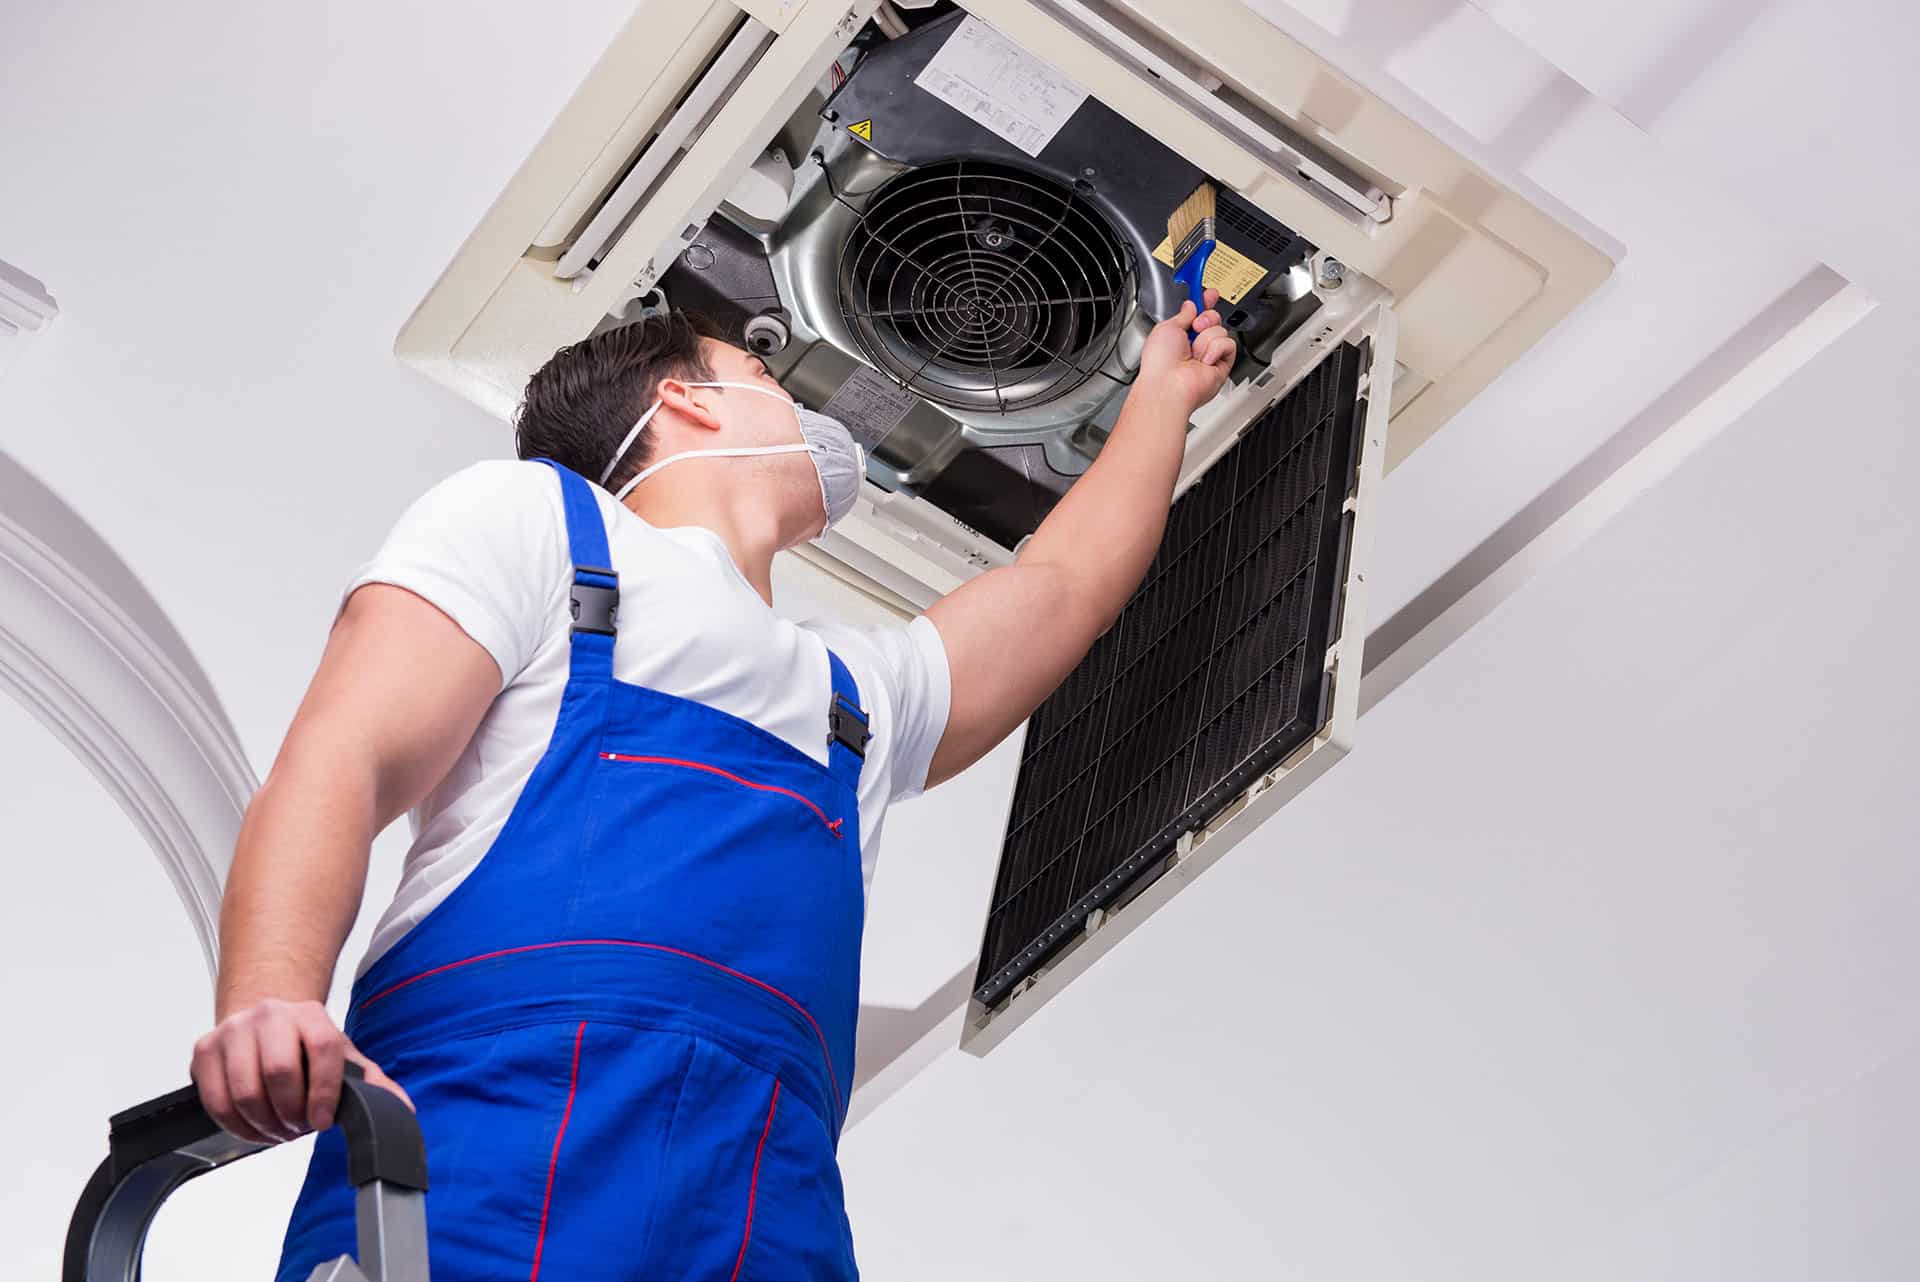 Technician cleaning air conditioning unit